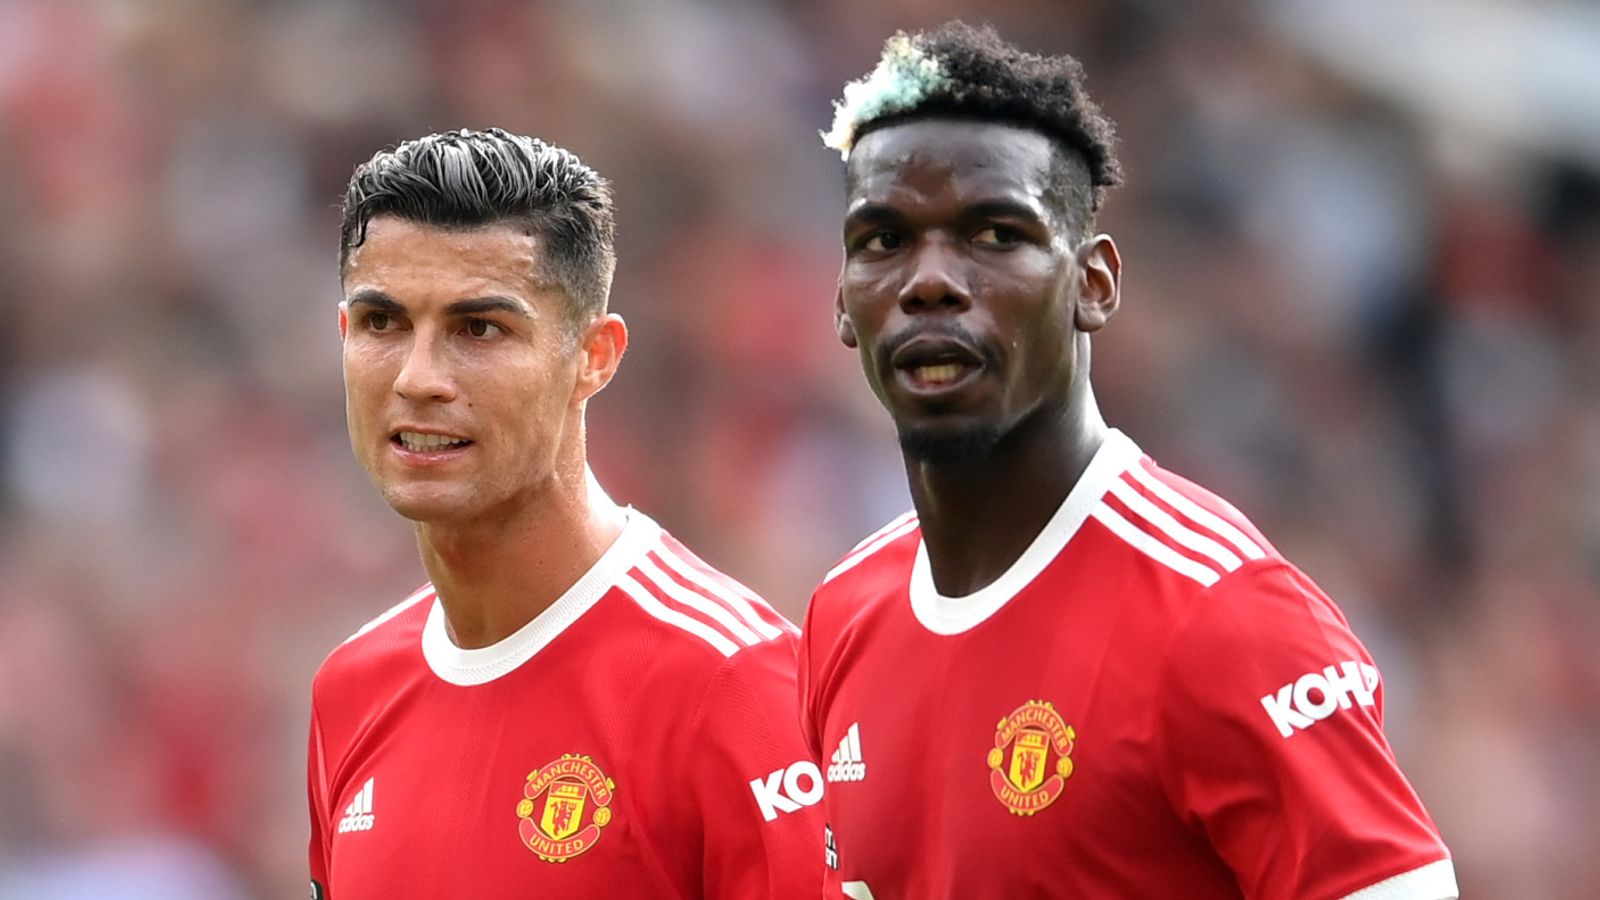 Man United news: Paul Pogba joins squad for team bonding after